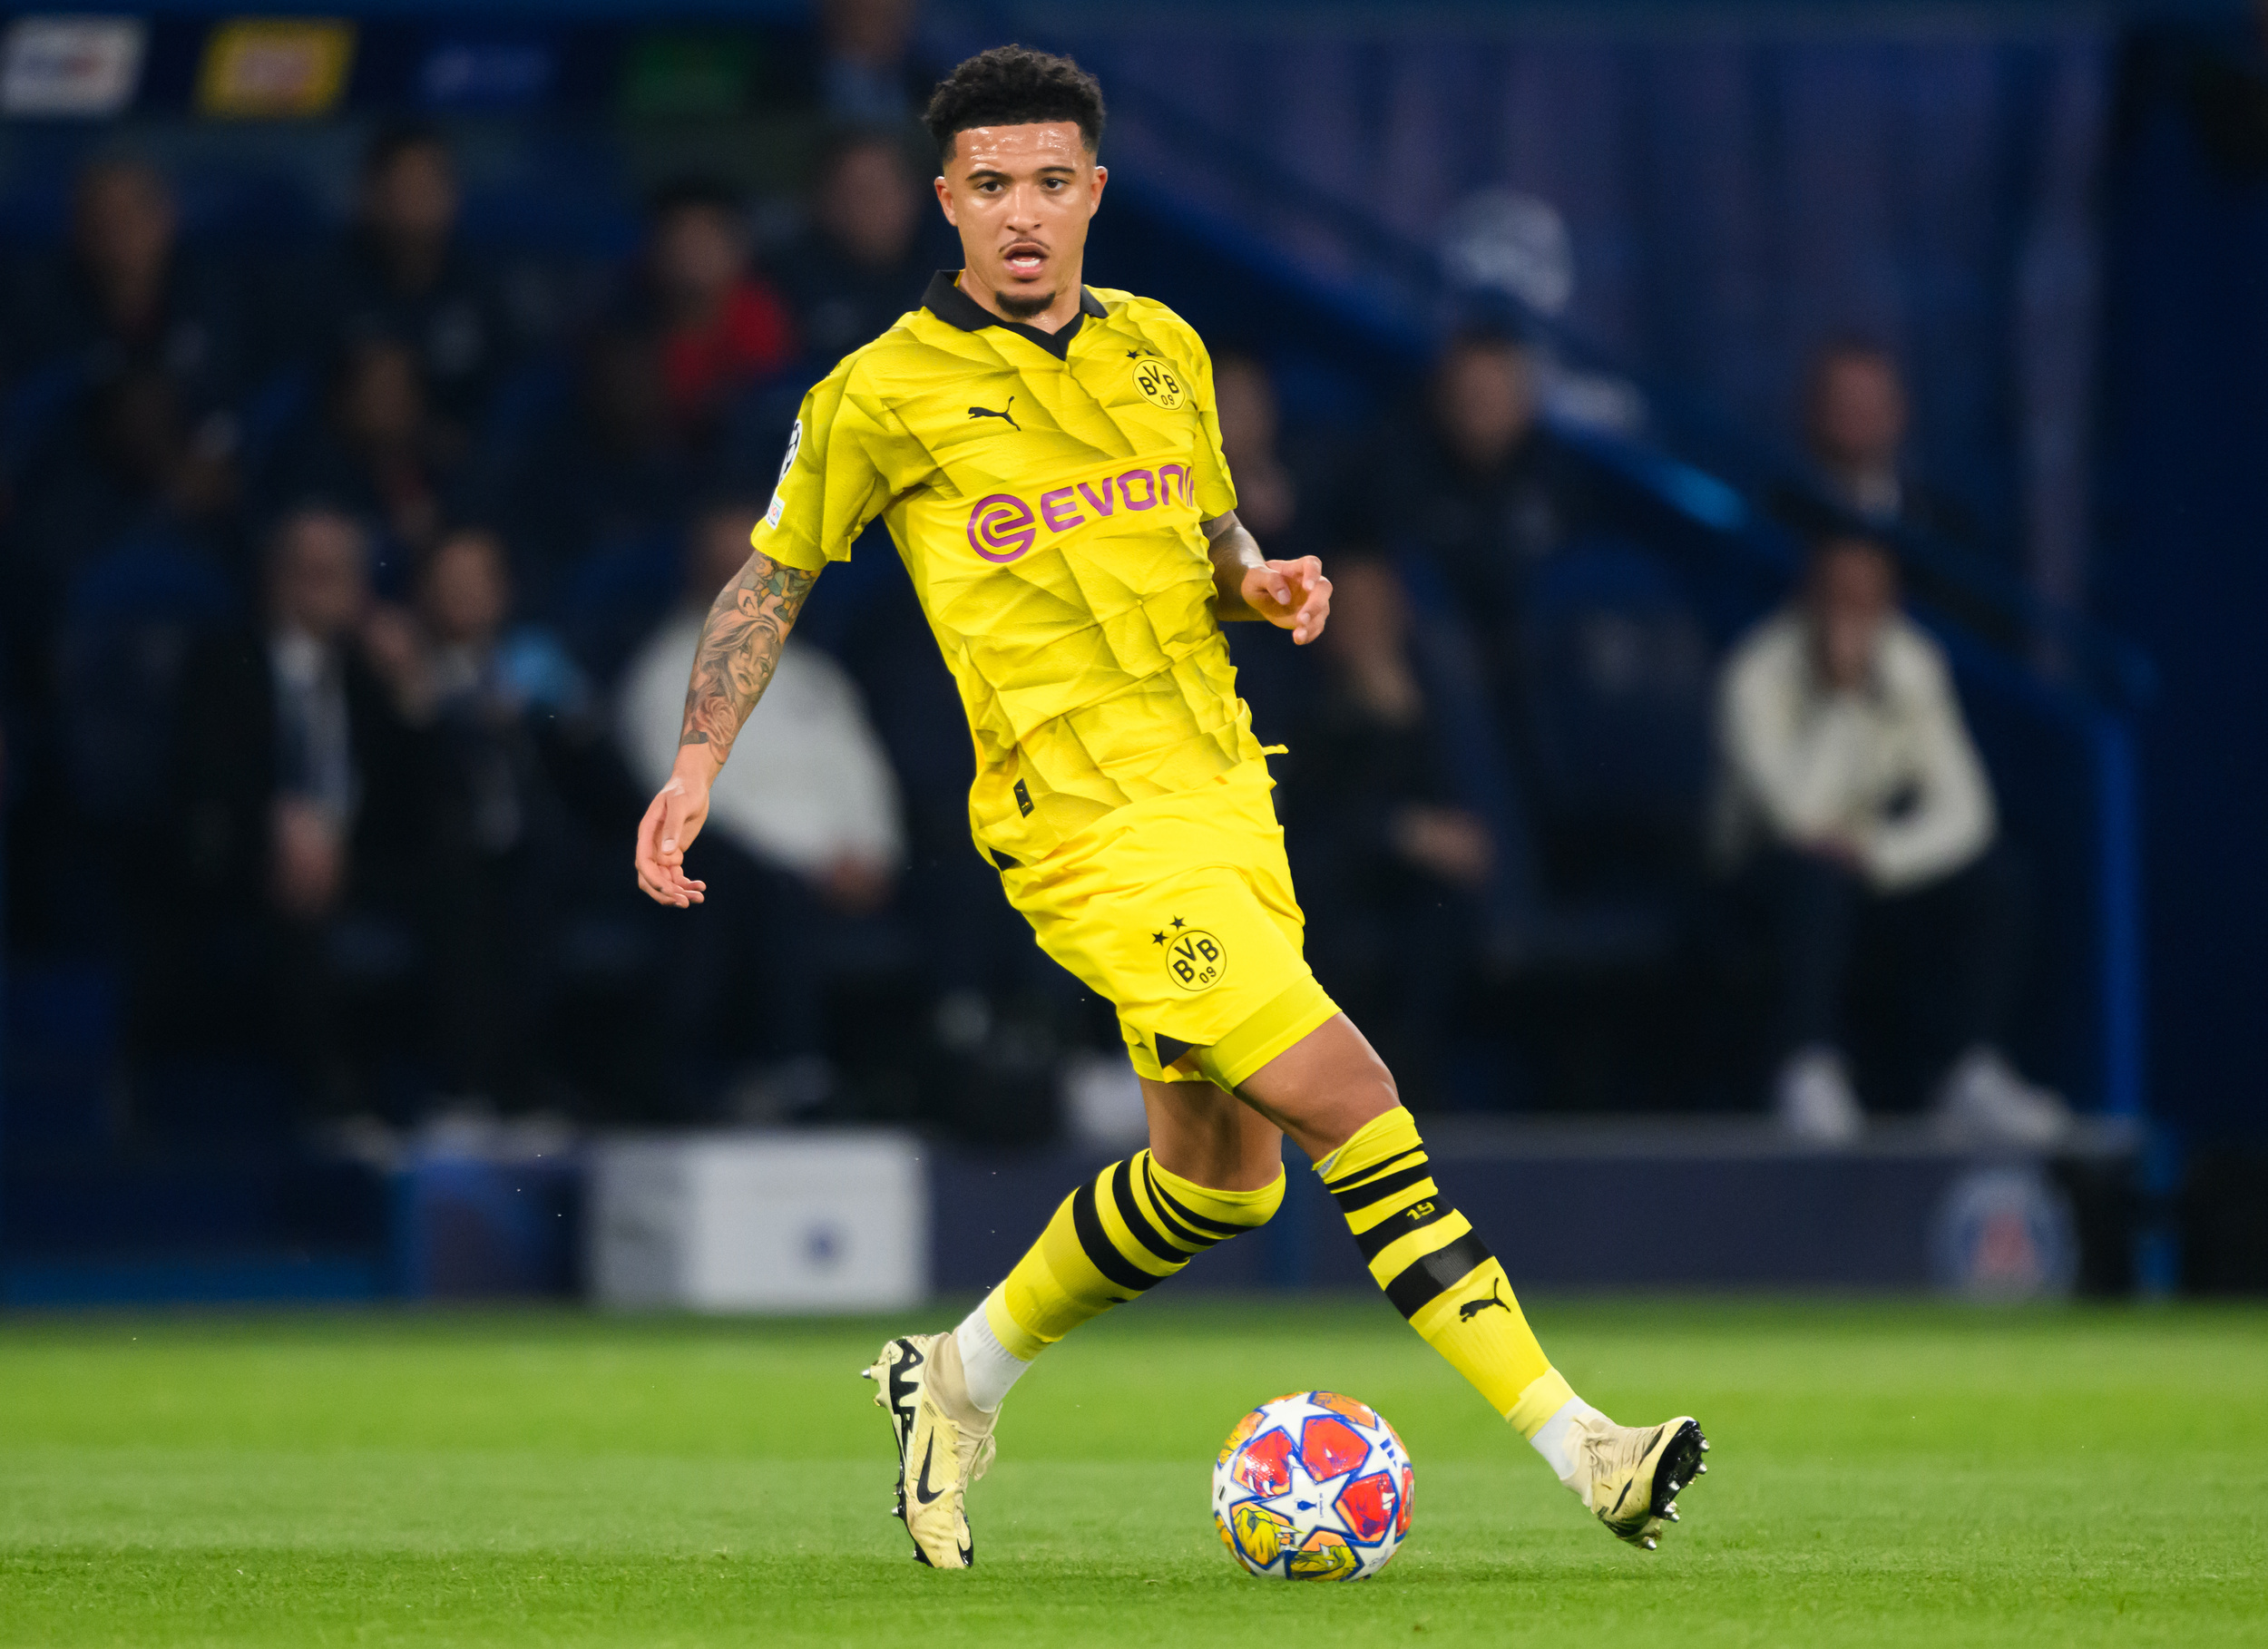 watch: jadon sancho leads bvb dressing room celebrations with adele classic